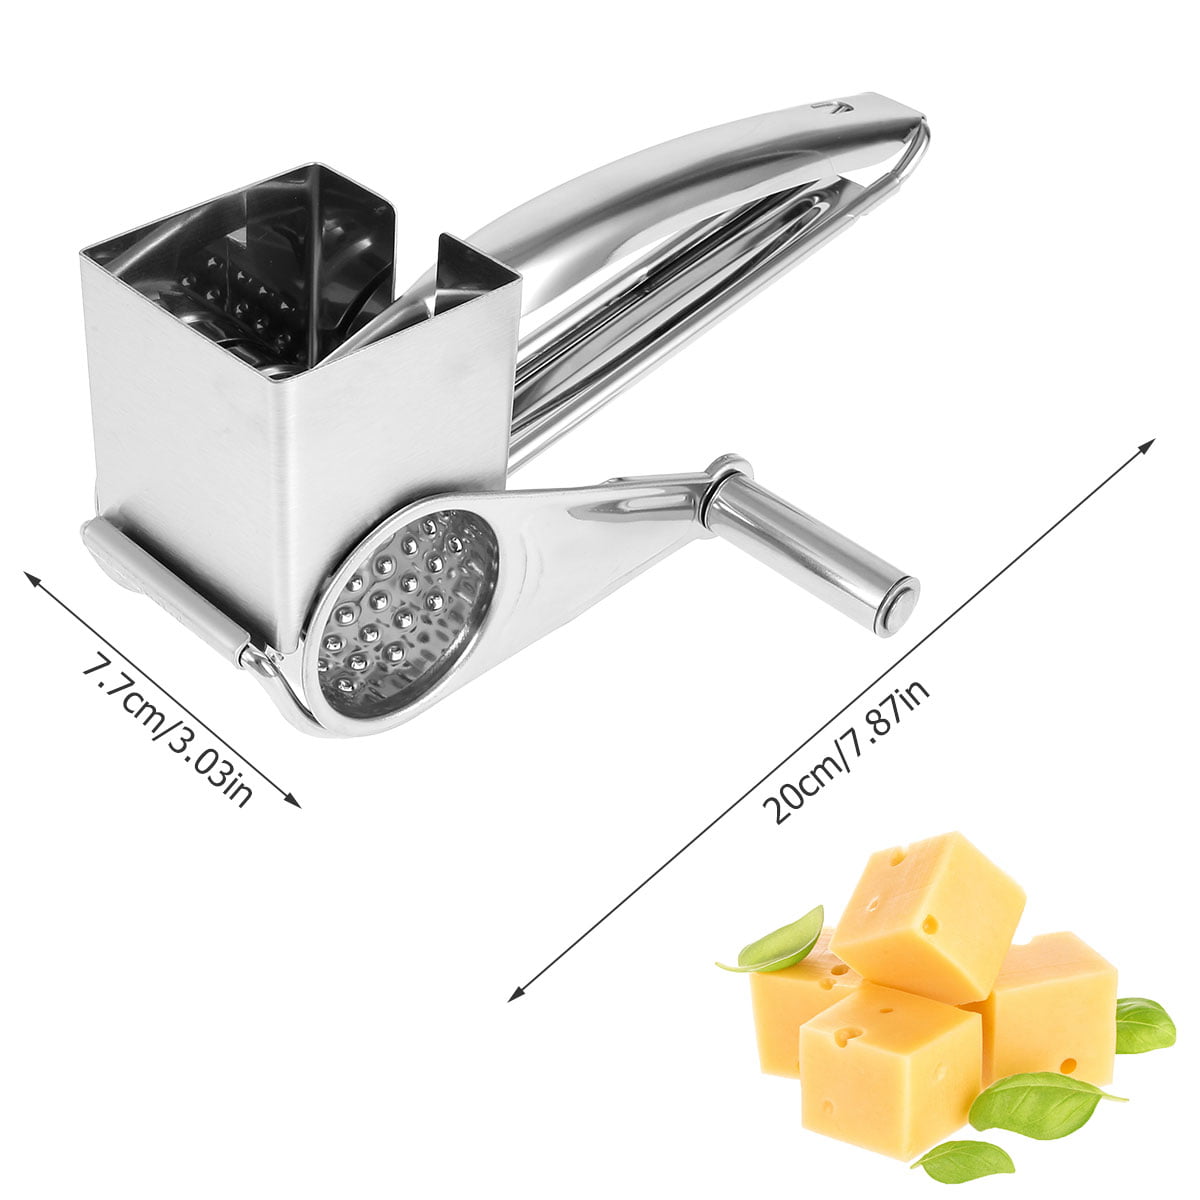 Dropship Large Grater Shaver Stainless Steel Blade With Ergonomic Non-Stick  Handle For Parmesan Cheese, Chocolates, Vegetables Perfect Curl Food  Garnishing Cheese Grater Kitchen Gadget Tool to Sell Online at a Lower  Price